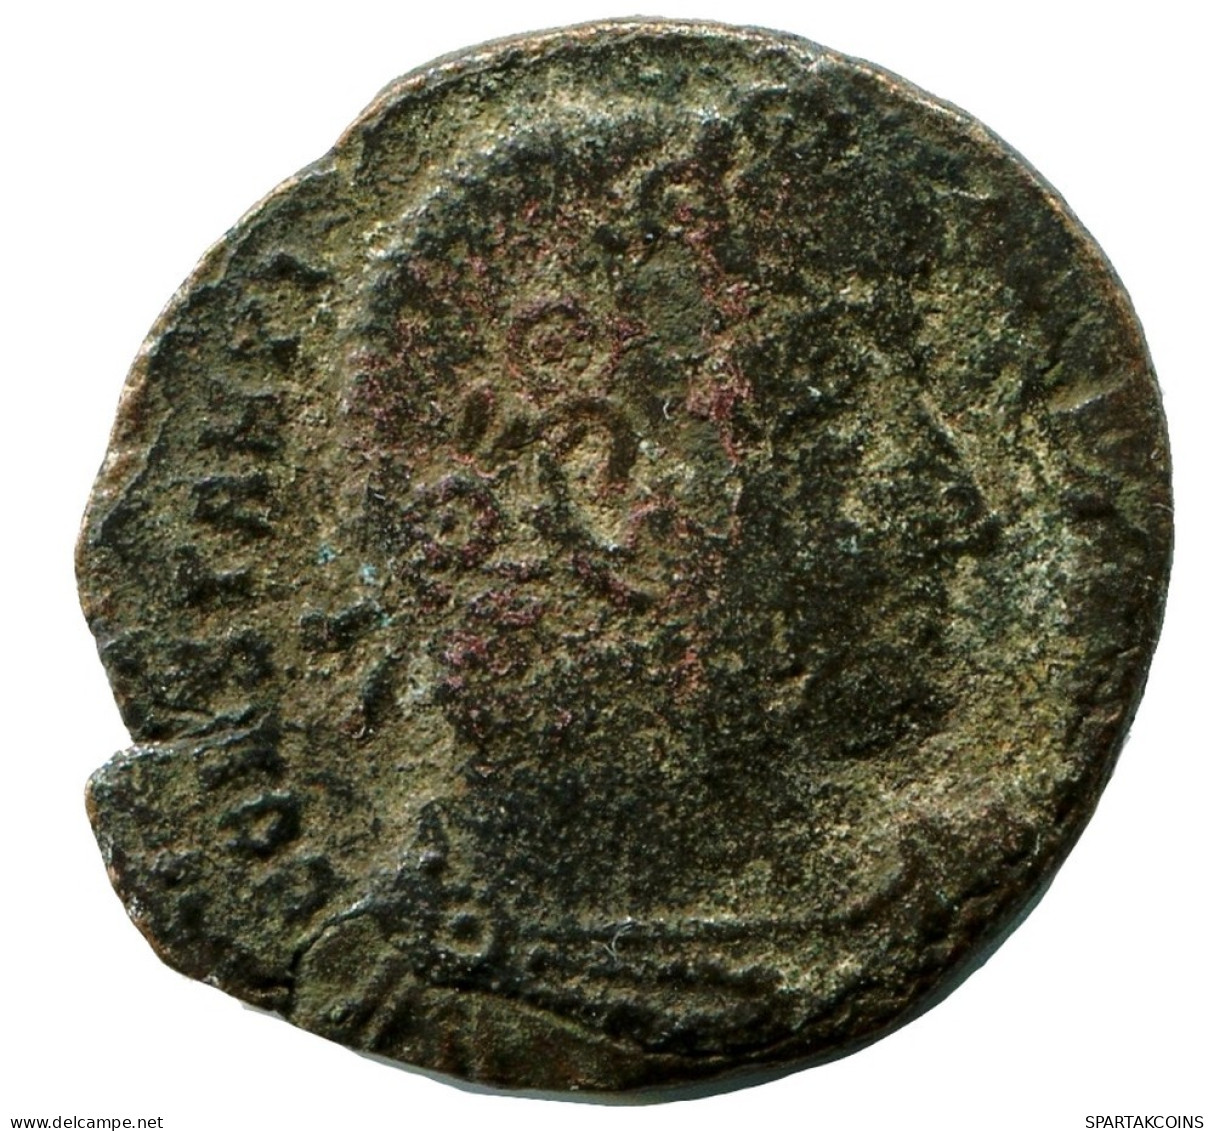 CONSTANTINE I MINTED IN ROME ITALY FROM THE ROYAL ONTARIO MUSEUM #ANC11169.14.F.A - El Imperio Christiano (307 / 363)